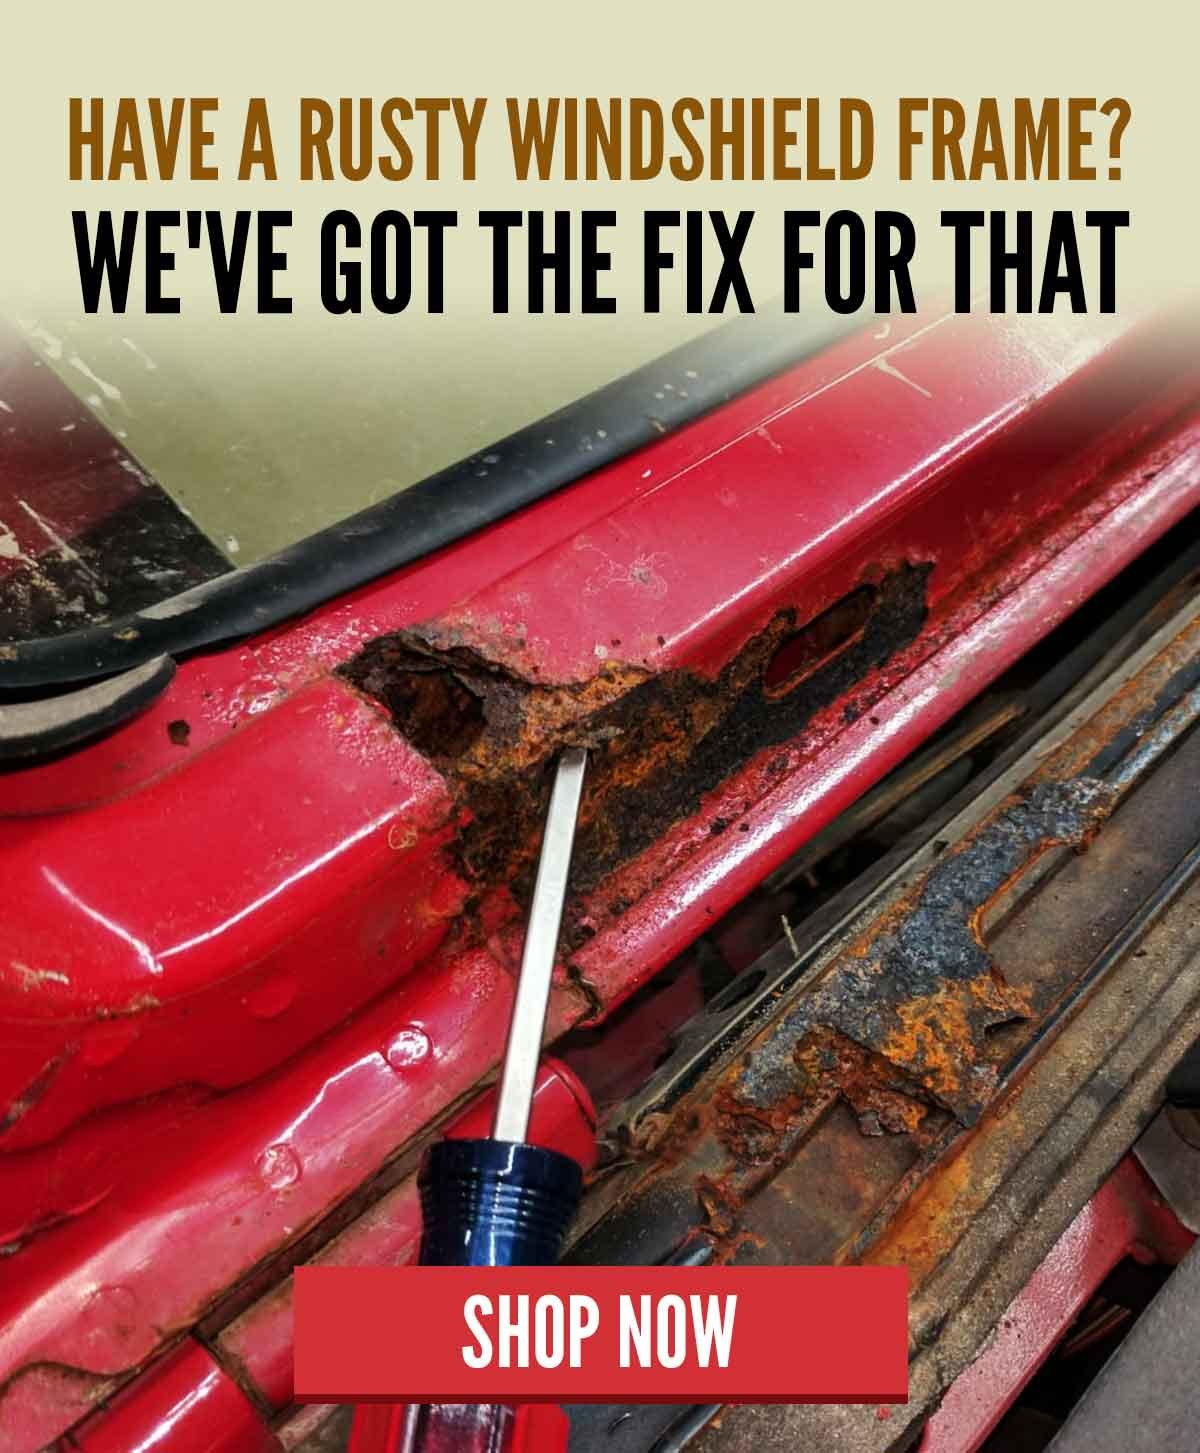 Have a Rusty windshield frame? We've got the fix for that